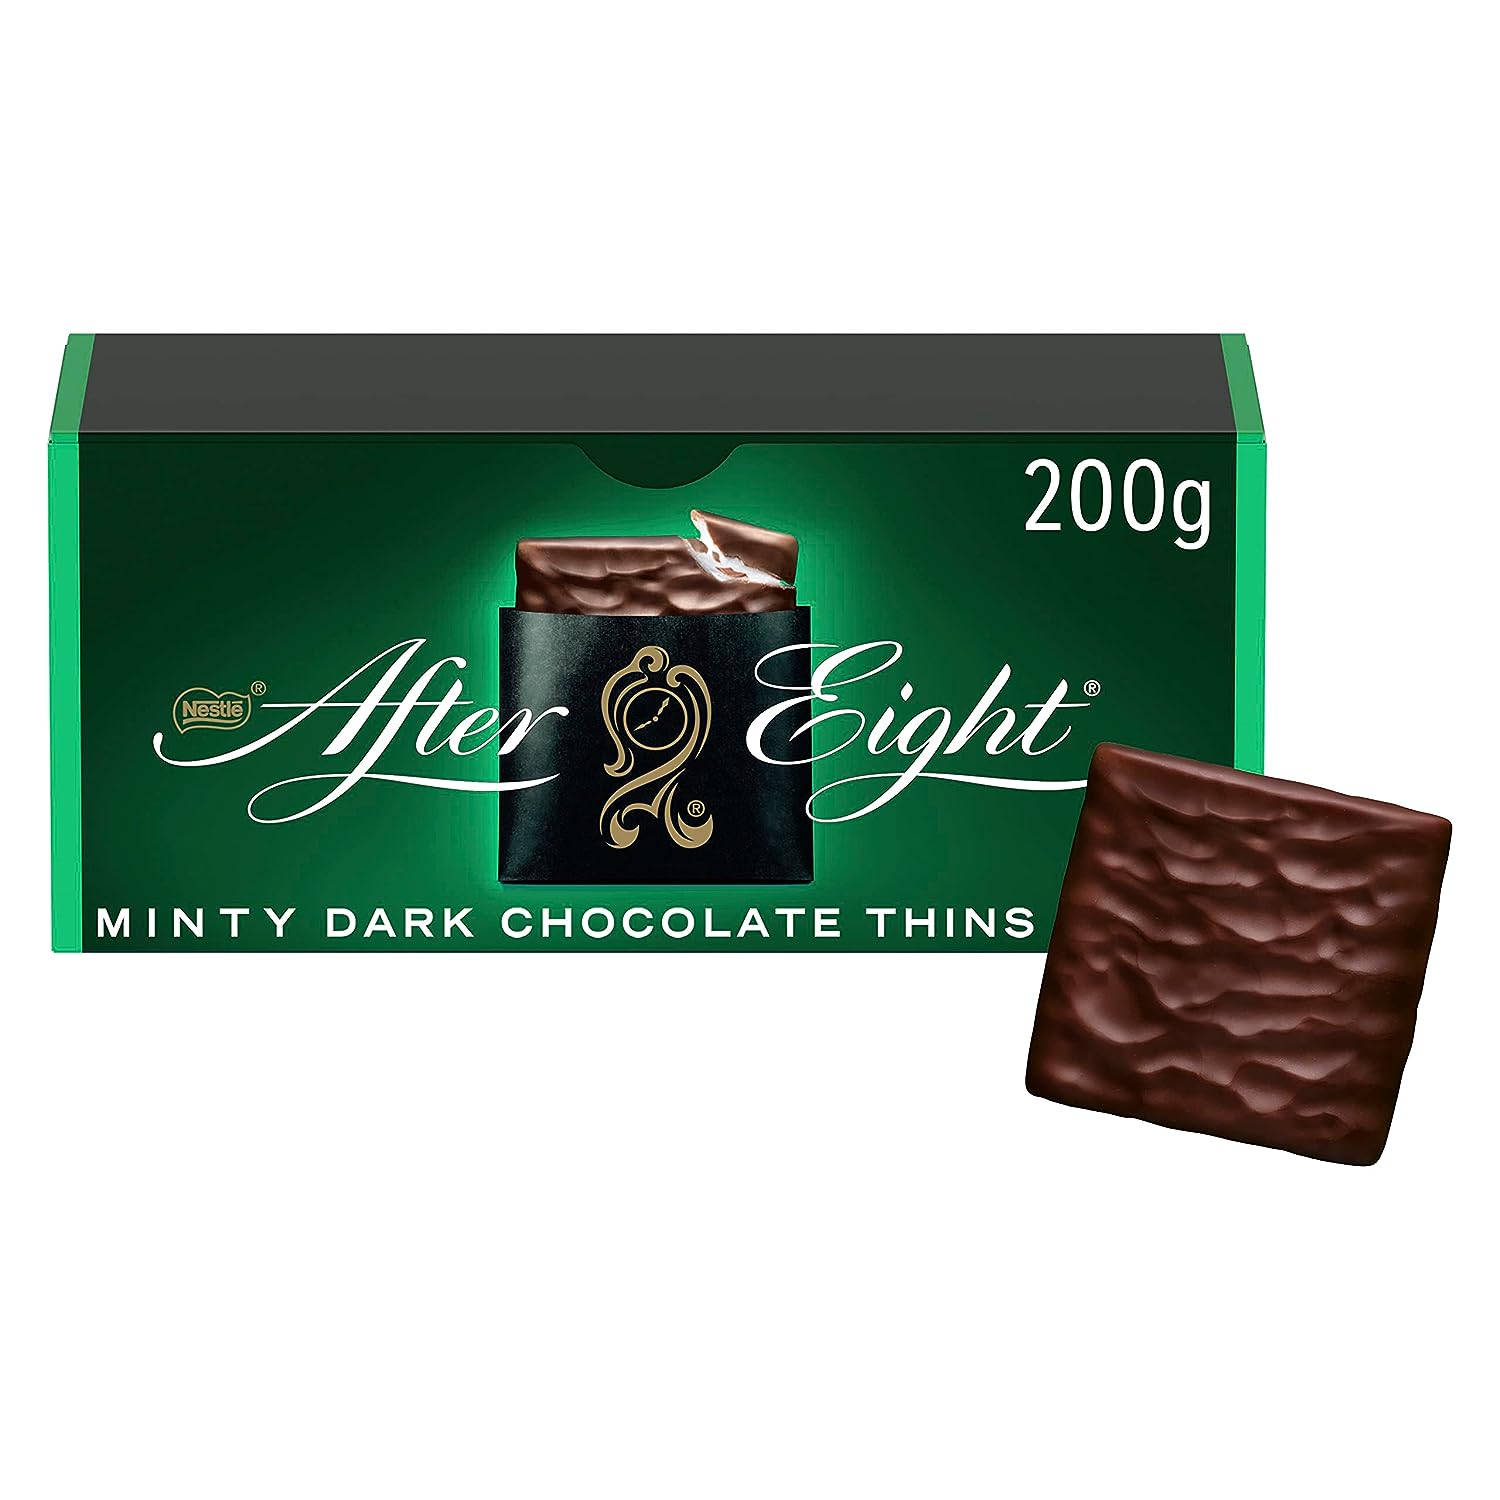 After Eight Dark Mints Chocolate 200g, Sweet City - Chocolates, Sweets, Drinks